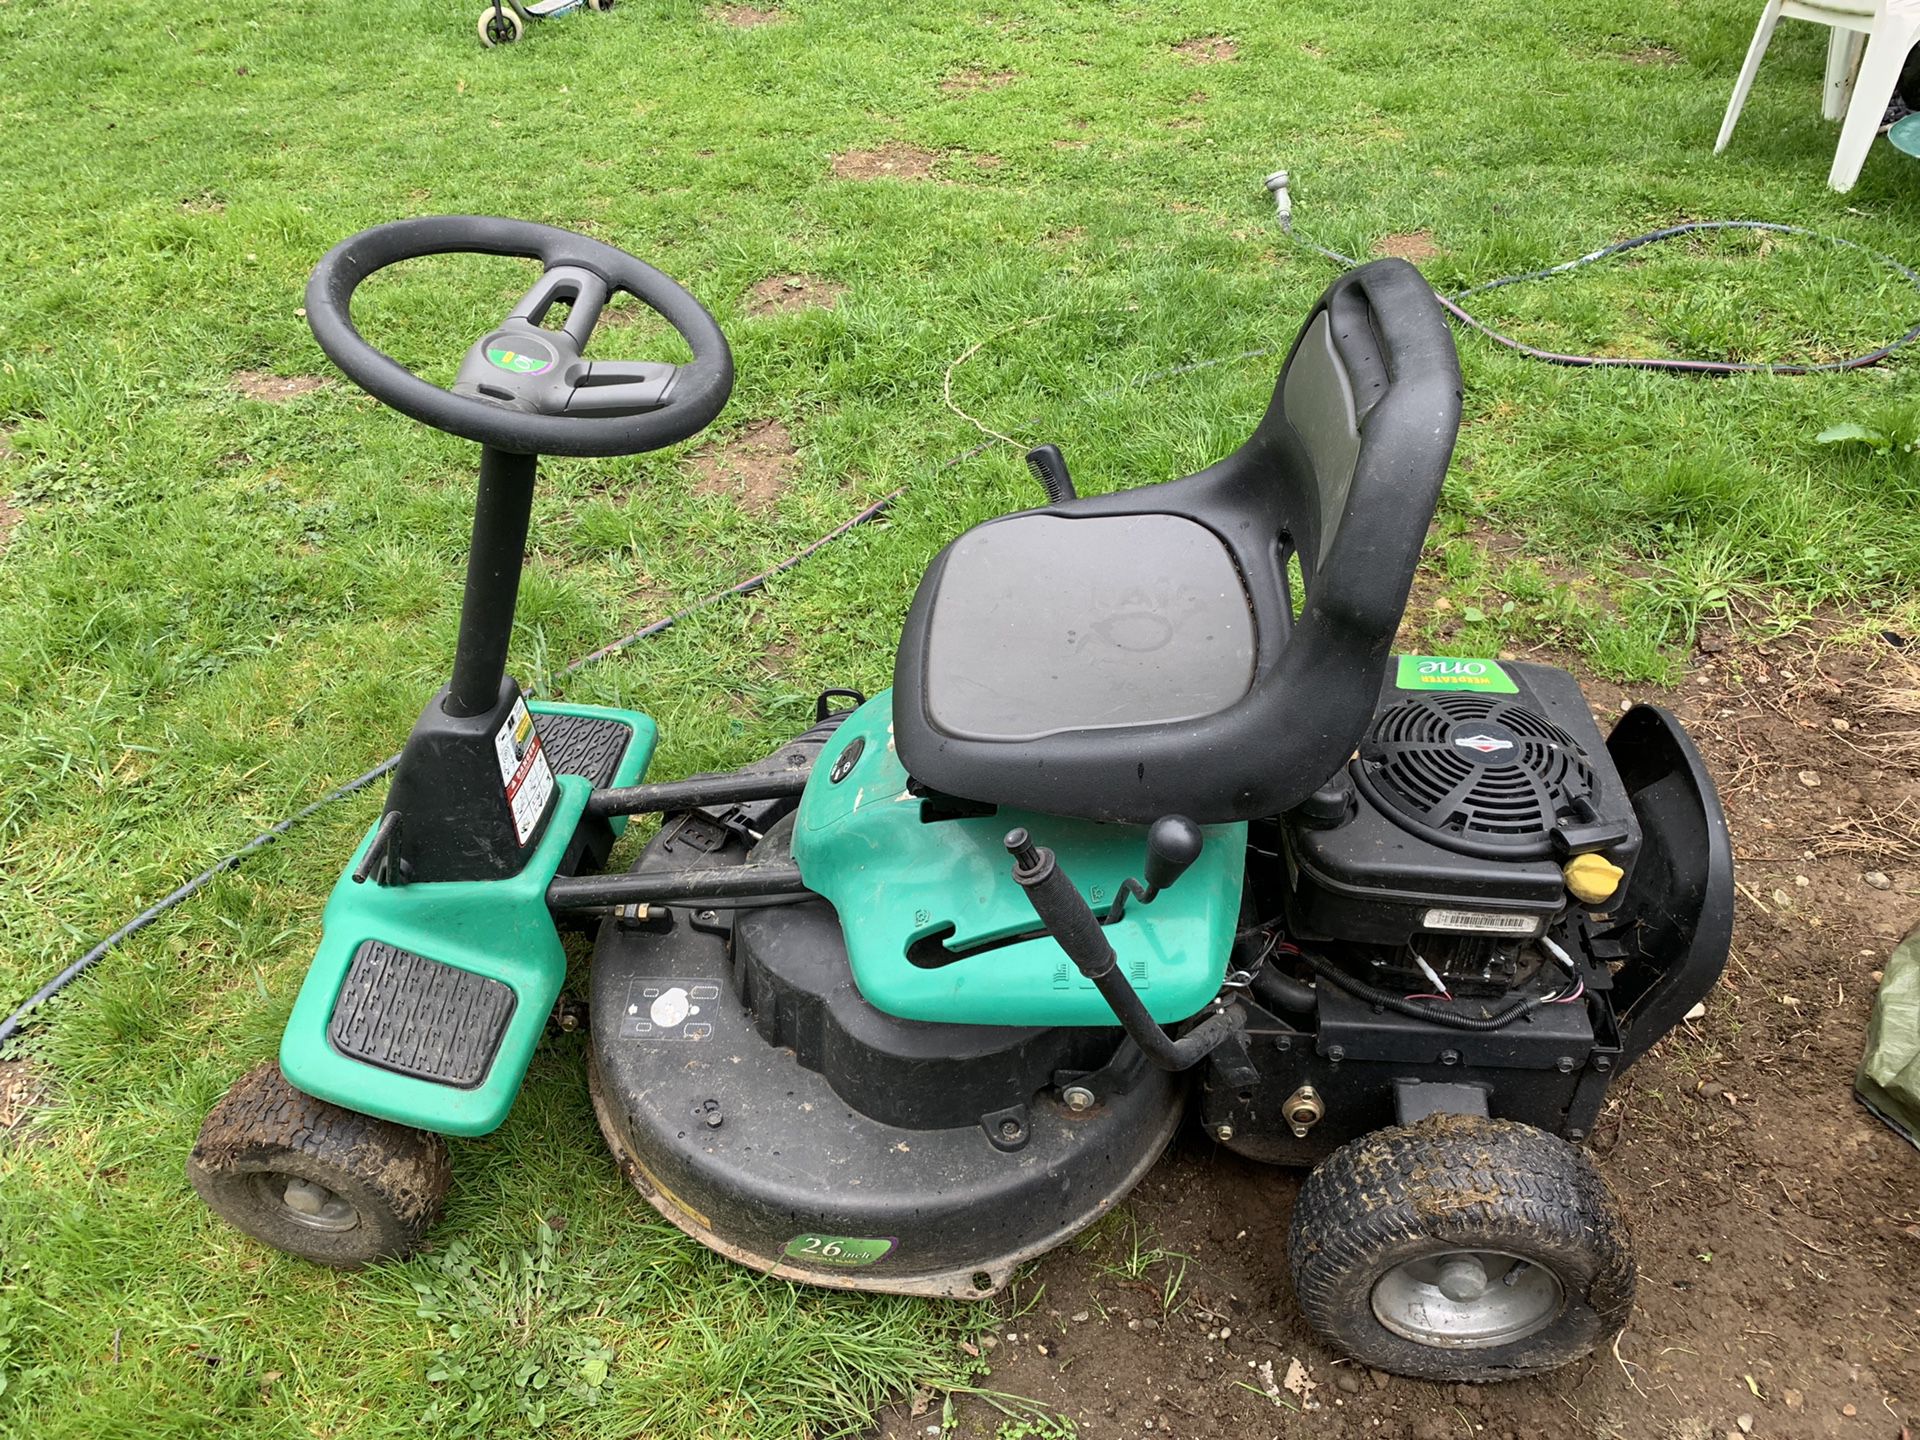 Weed eater one 875 series Riding mower